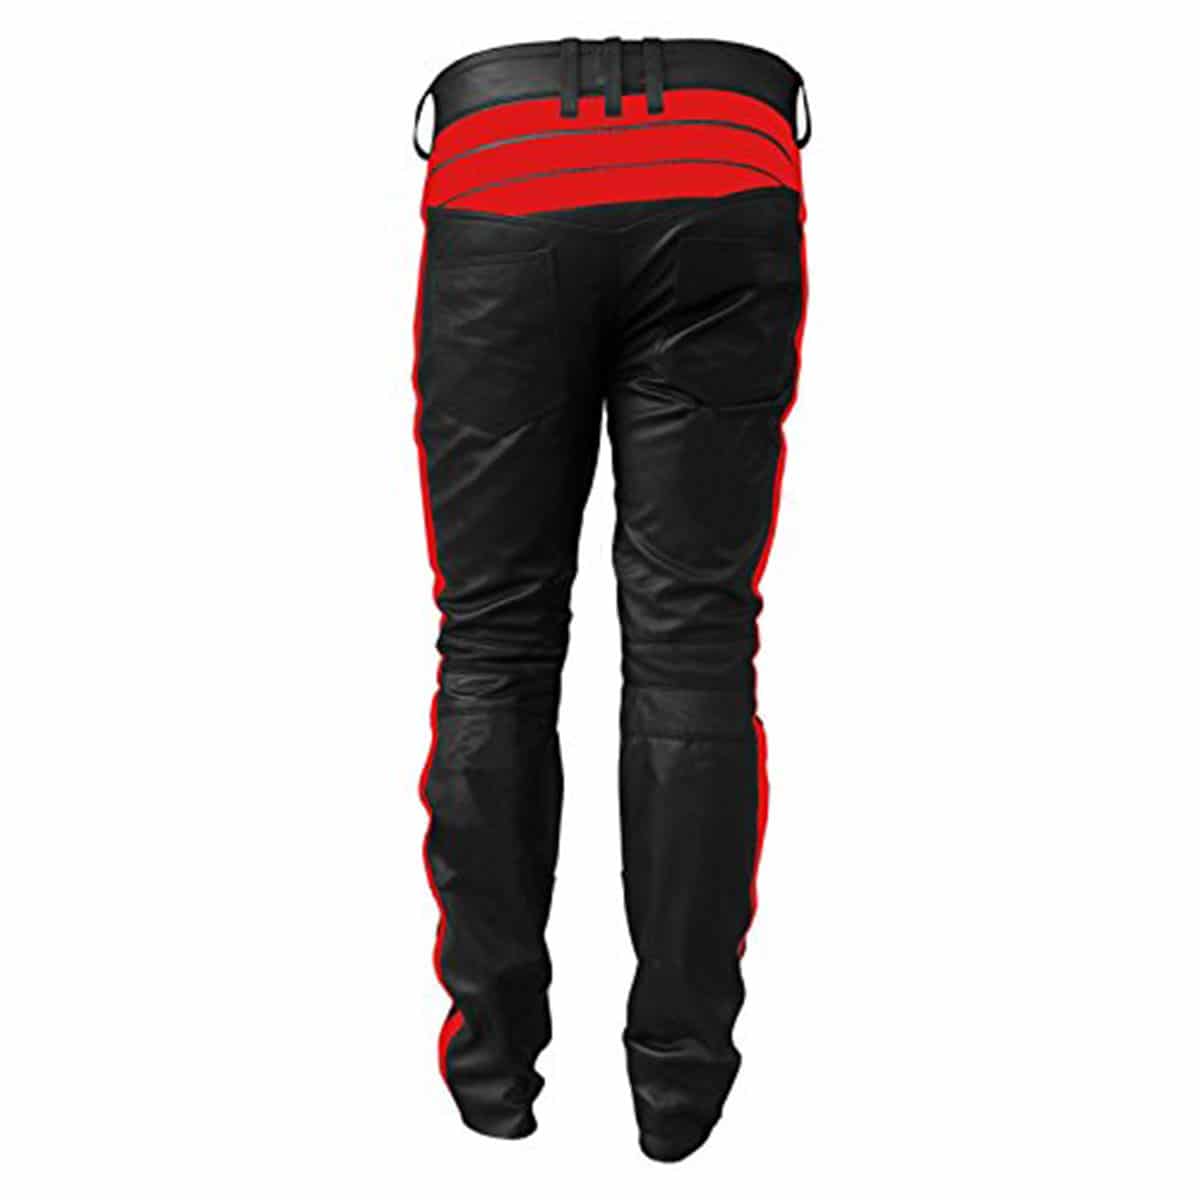 MENS MOTORCYCLE BIKERS BLACK with RED STRIPES LEATHER PANTS JEANS TROUSER - J5-RED